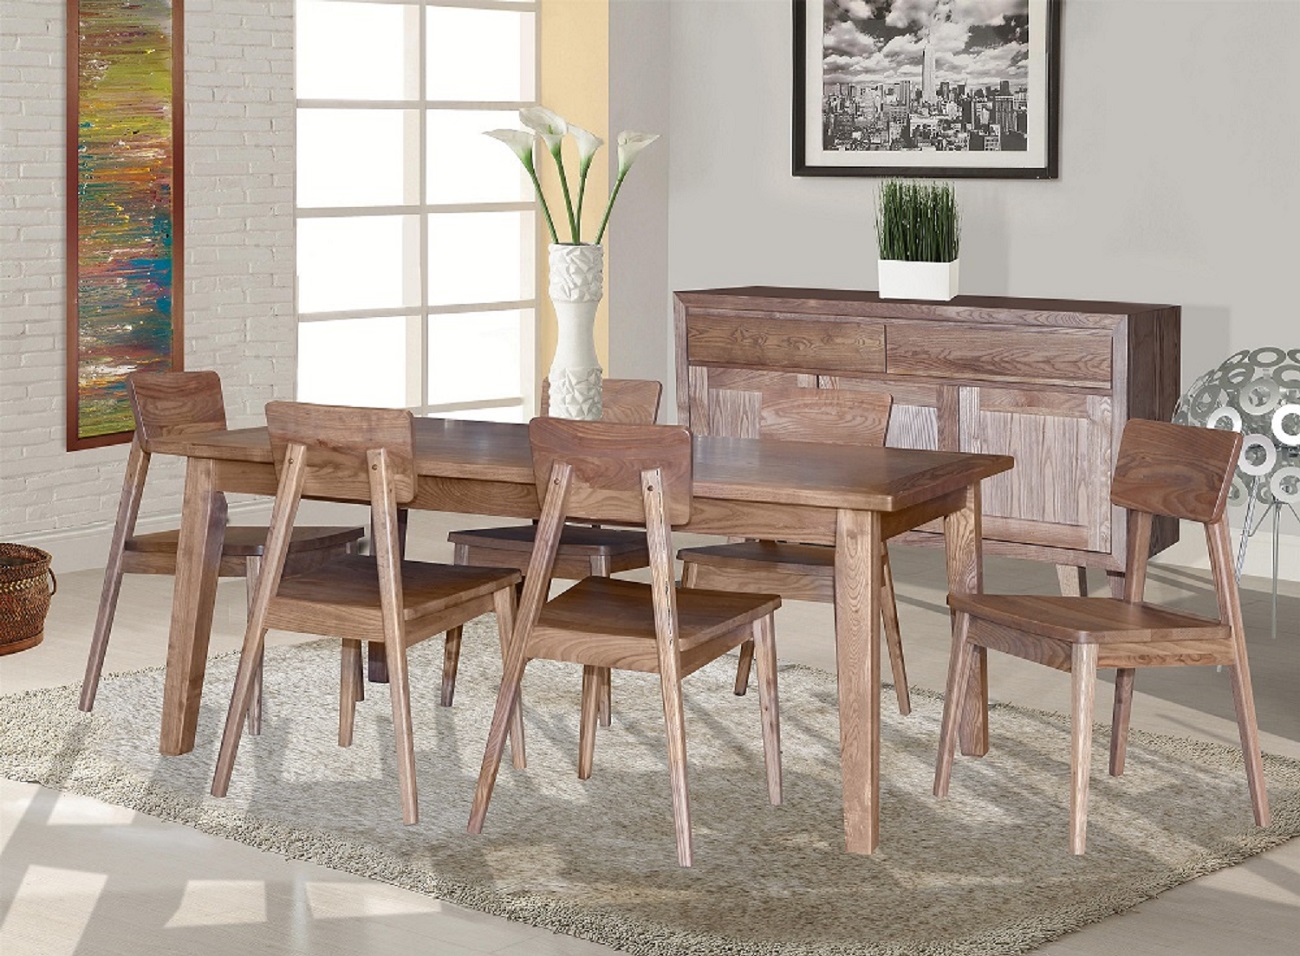 Ascension Dining with Timber Chair